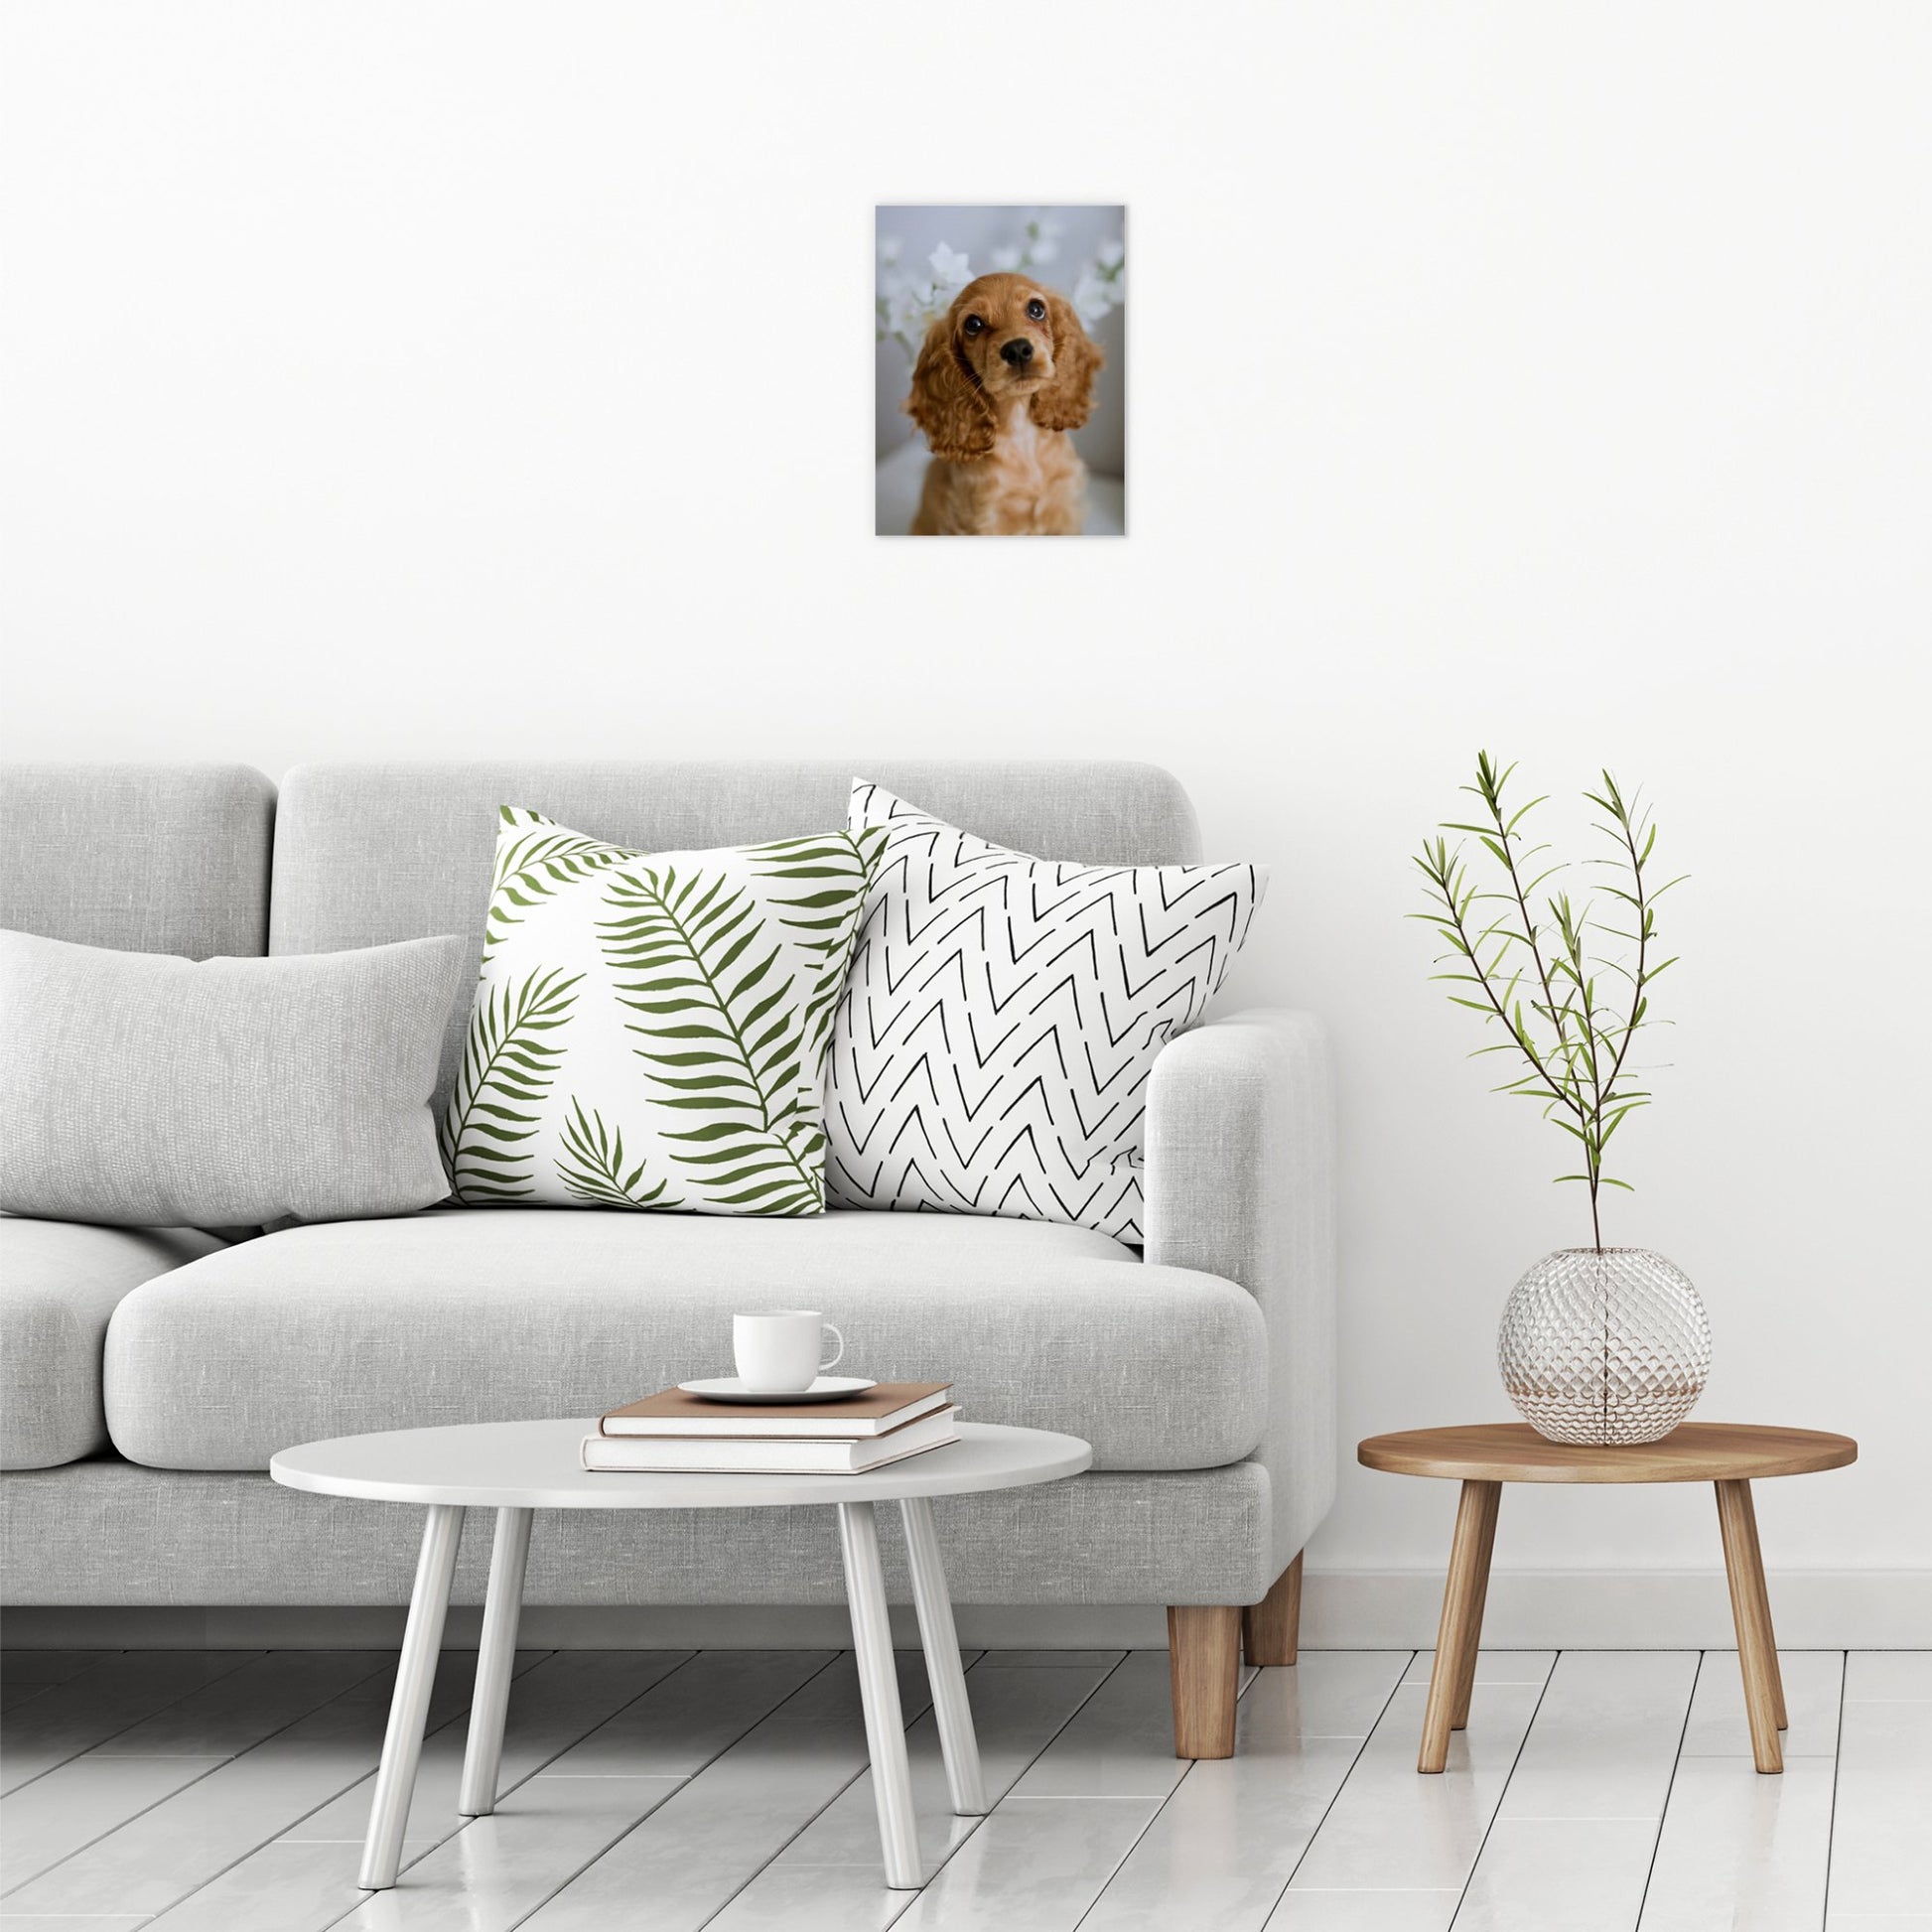 A contemporary modern room view showing a small size metal art poster display plate with printed design of a Cute Golden Cocker Spaniel